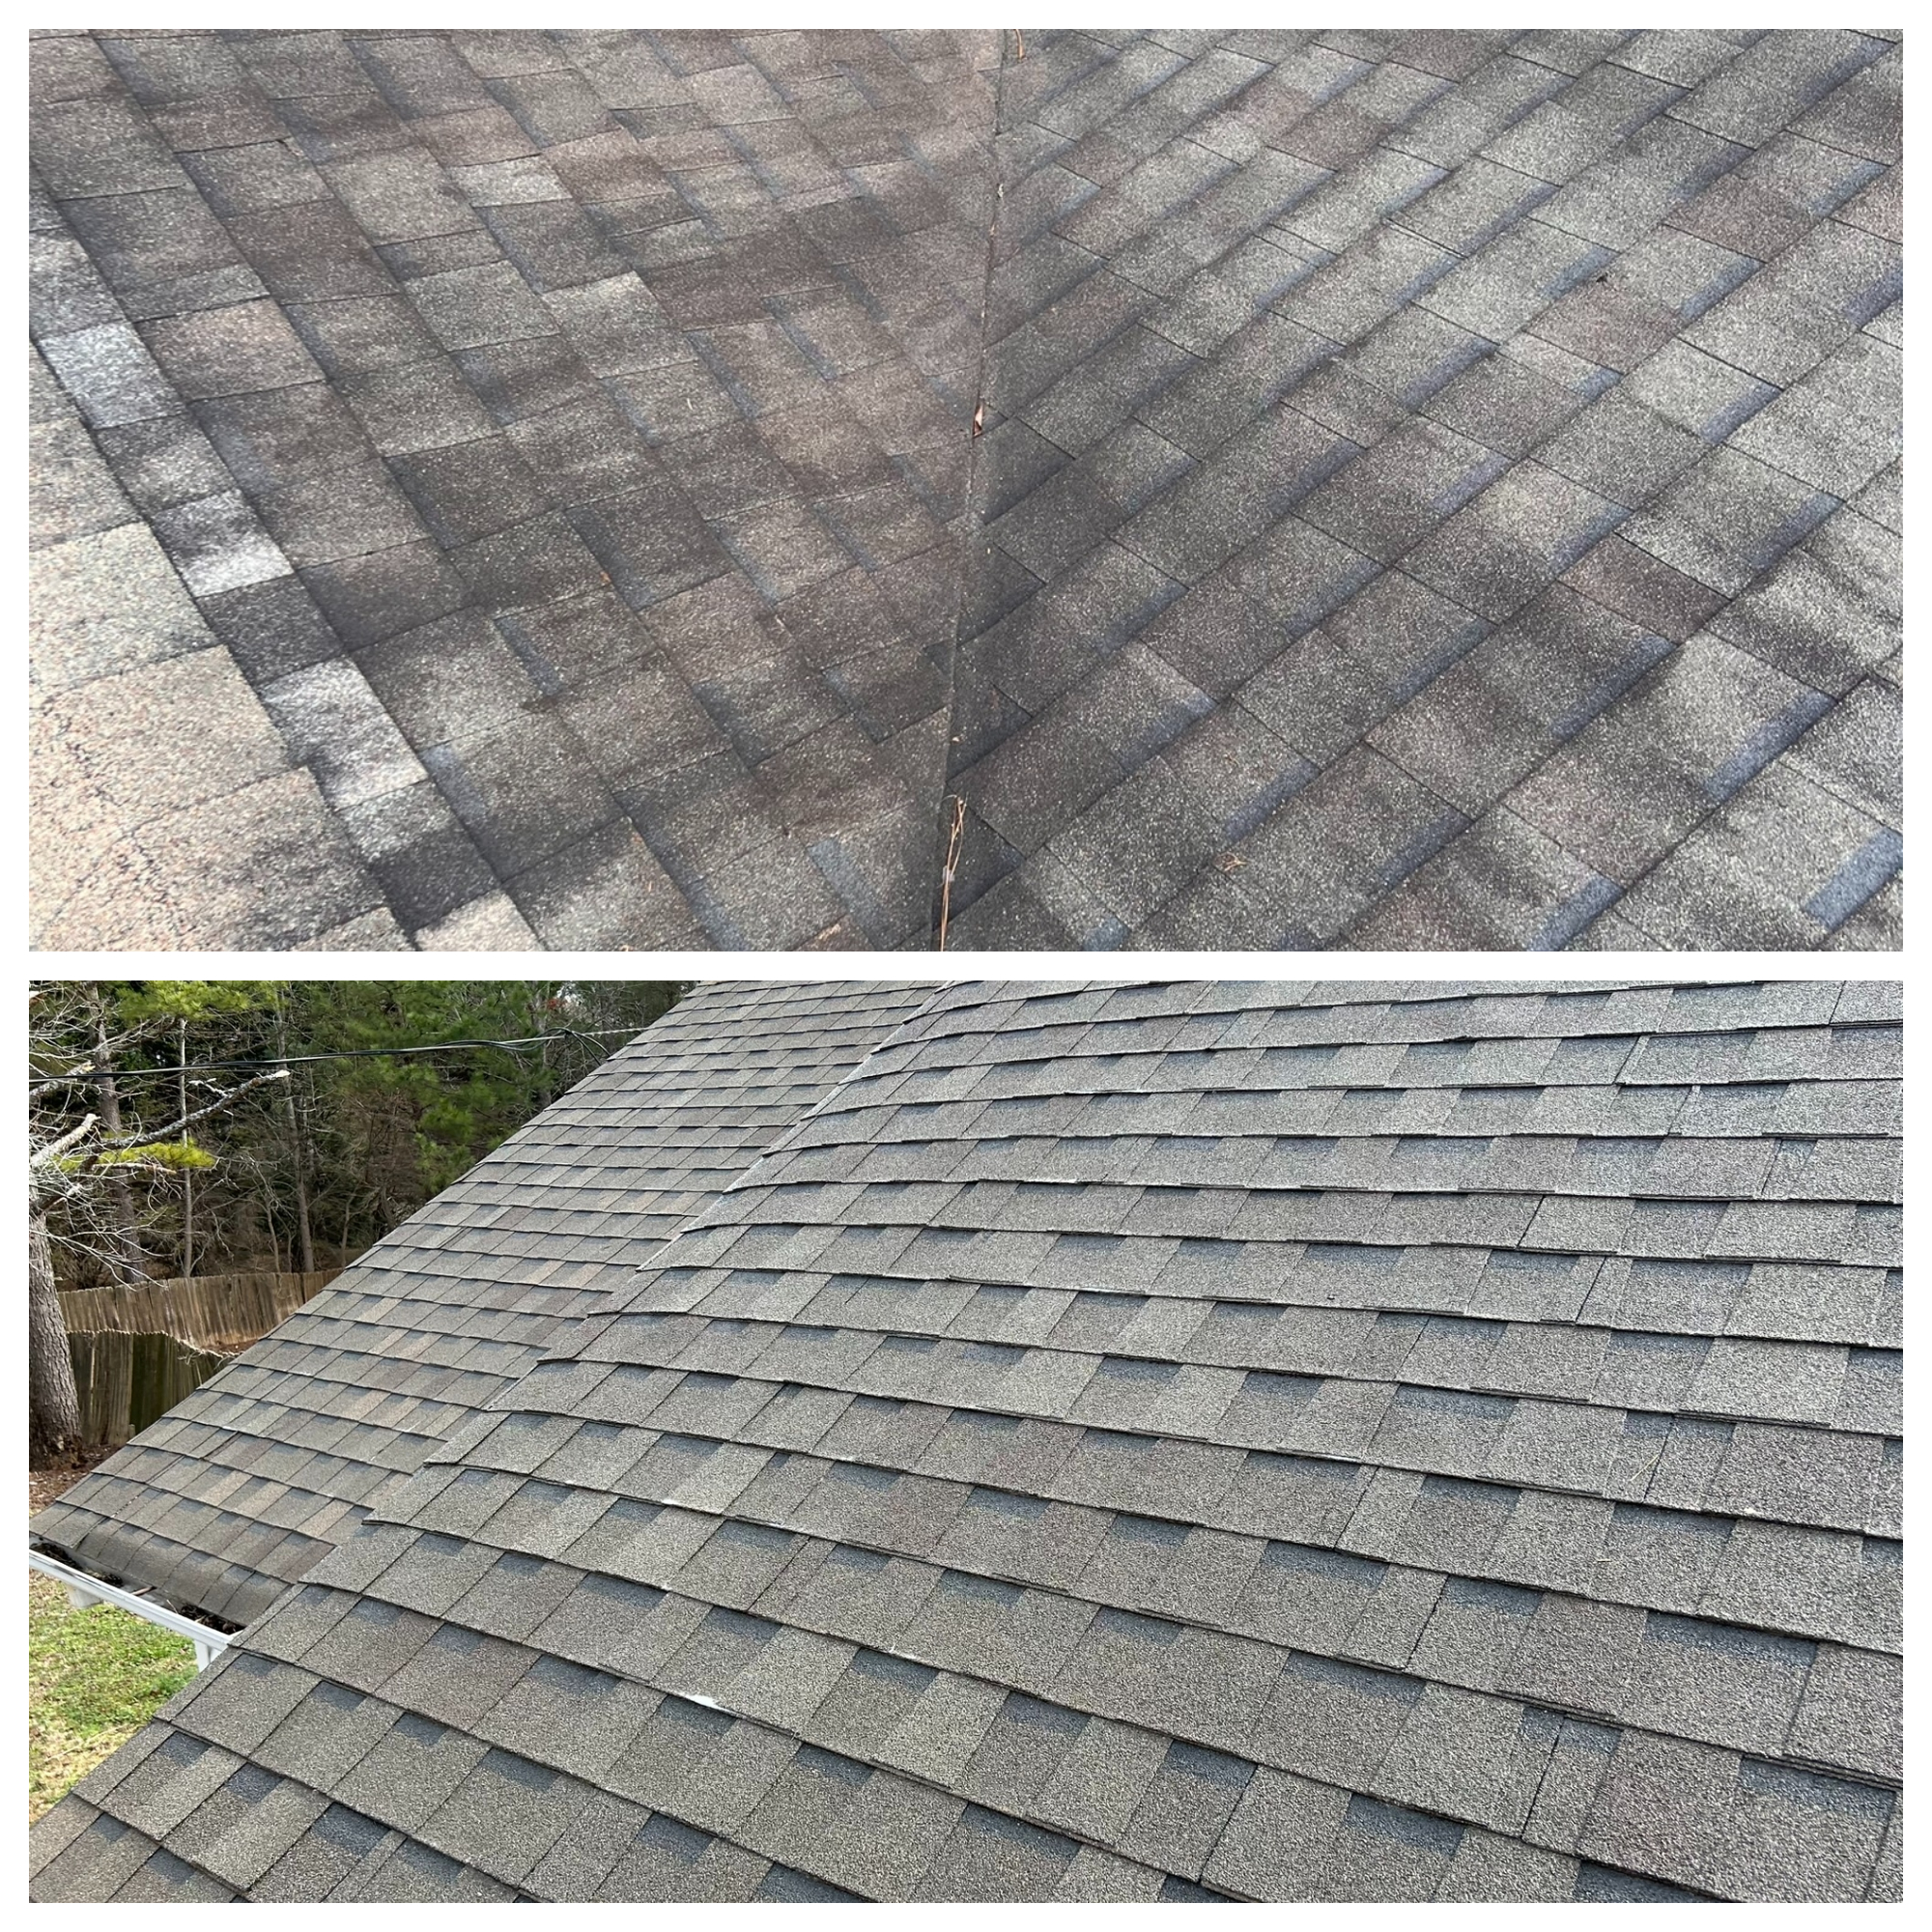 Soft Wash Roof Cleaning in McDonough, GA Will Help This Homeowner From Being Dropped by Their Insurance.